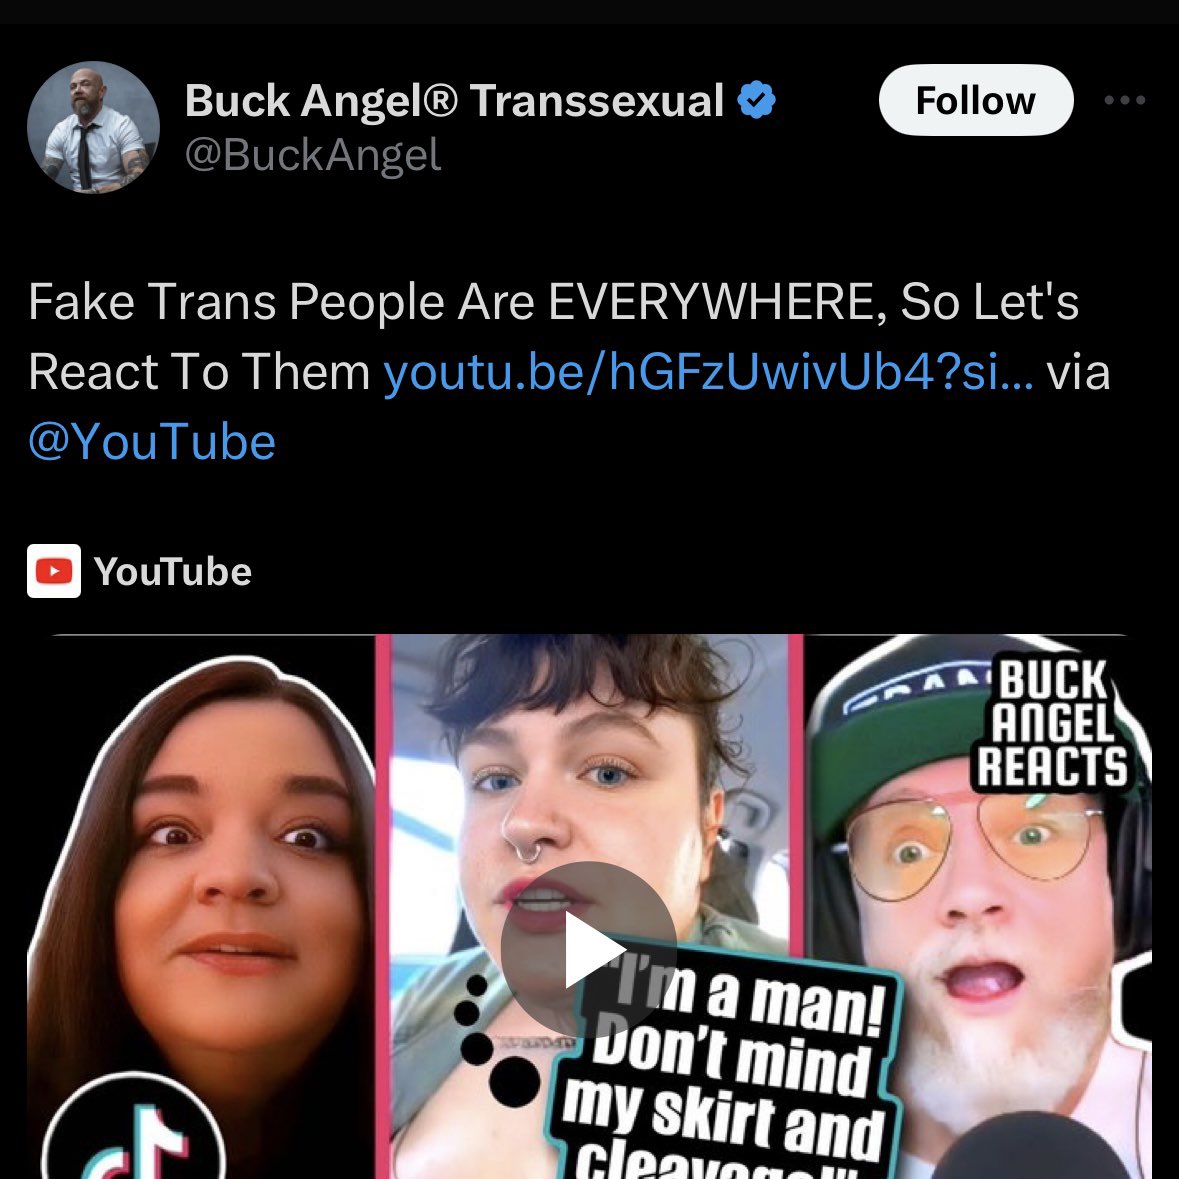 Well, if this isn't a self-own.

Is there any other kind, @BuckAngel?